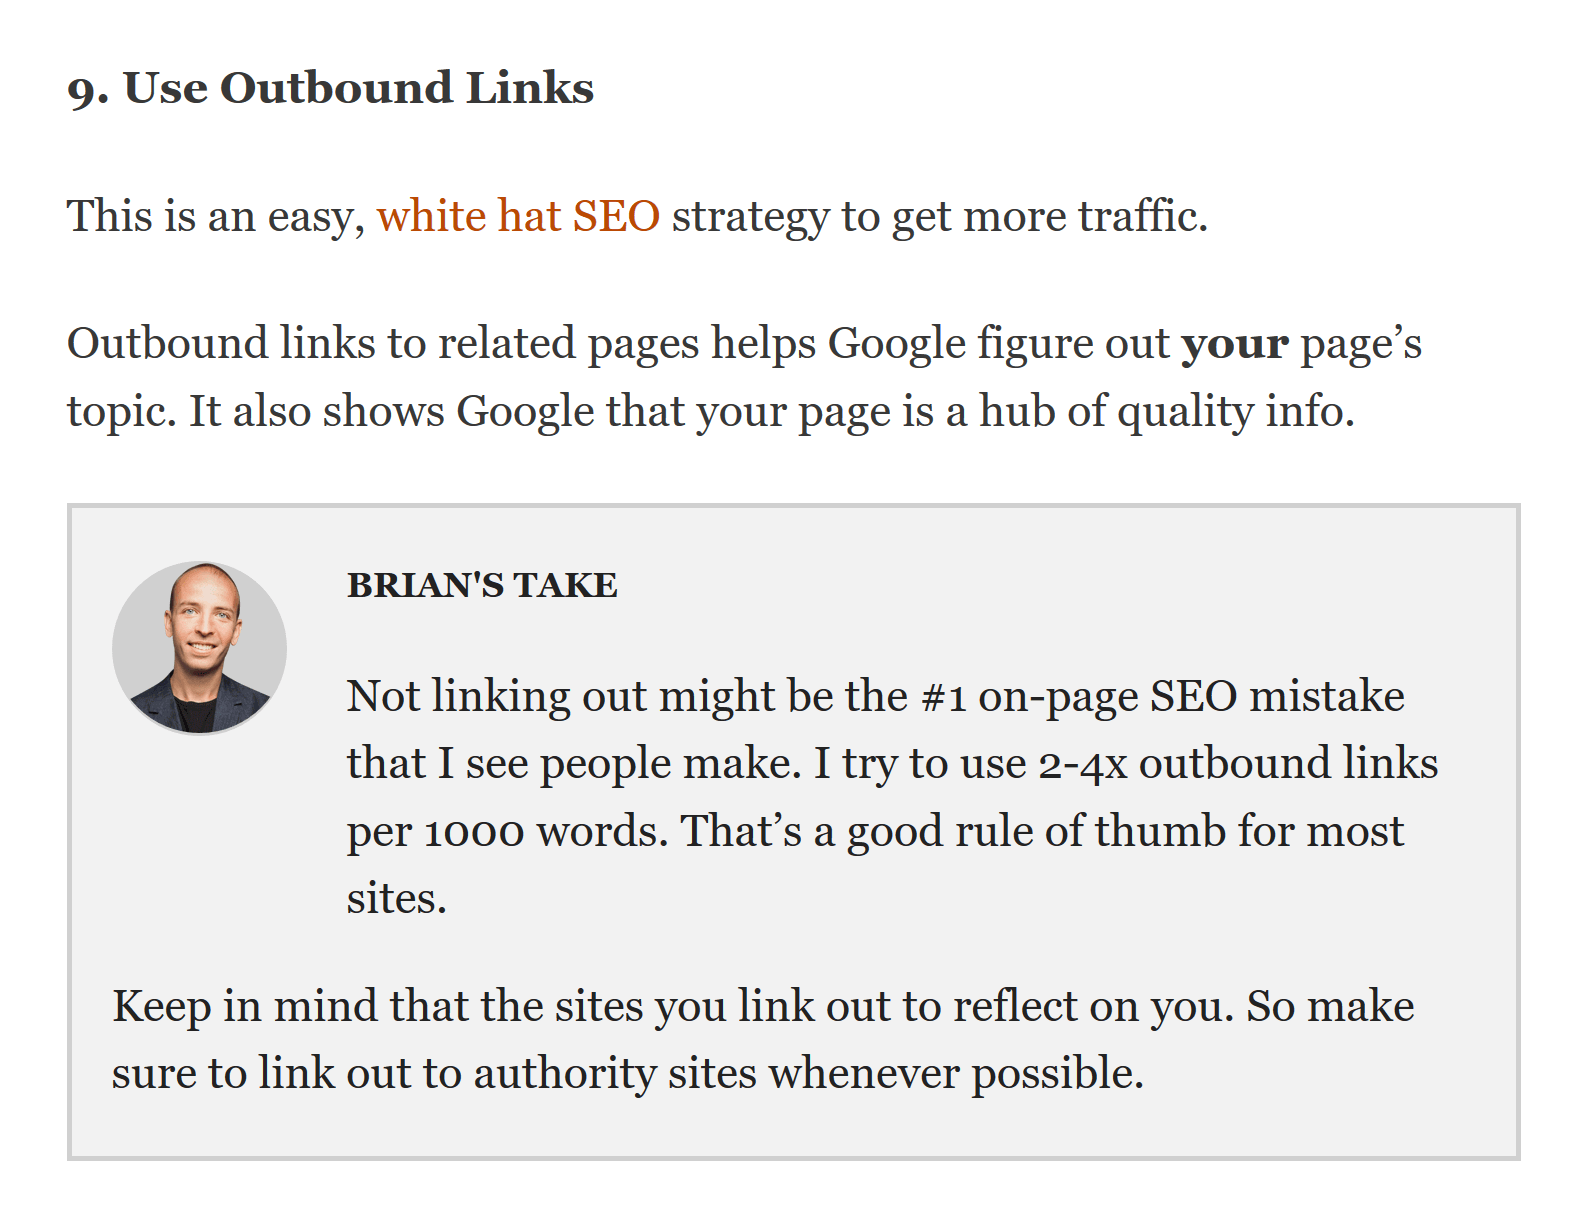 Brian Dean quote one of the biggest on-page B2B SEO mistakes is not linking out